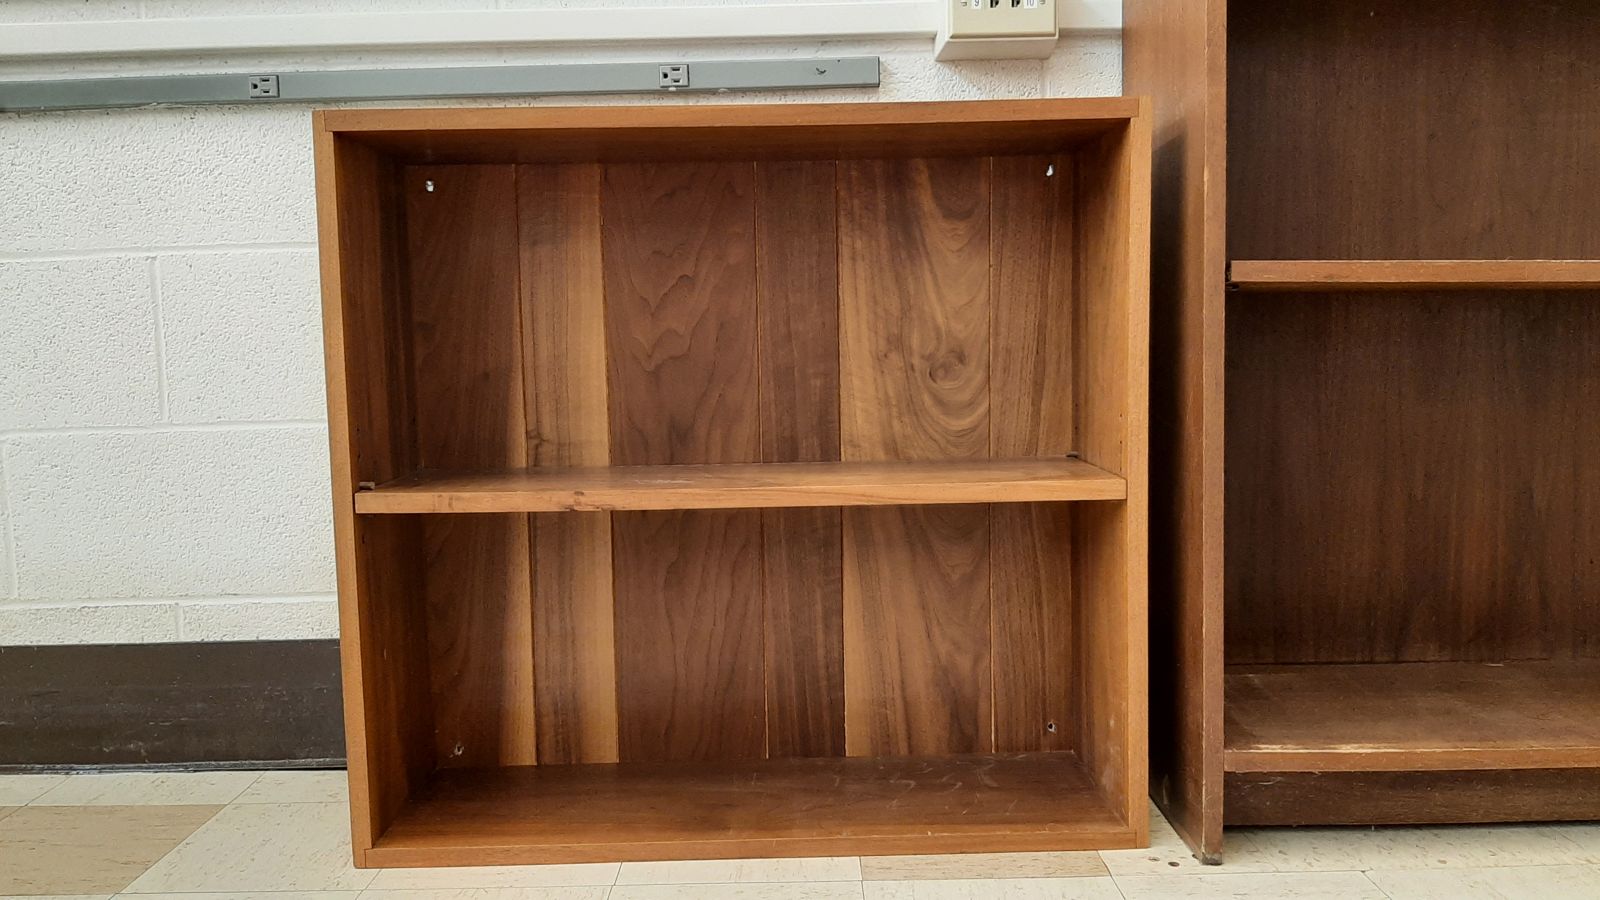 An image of a 2-shelf wood bookcase.